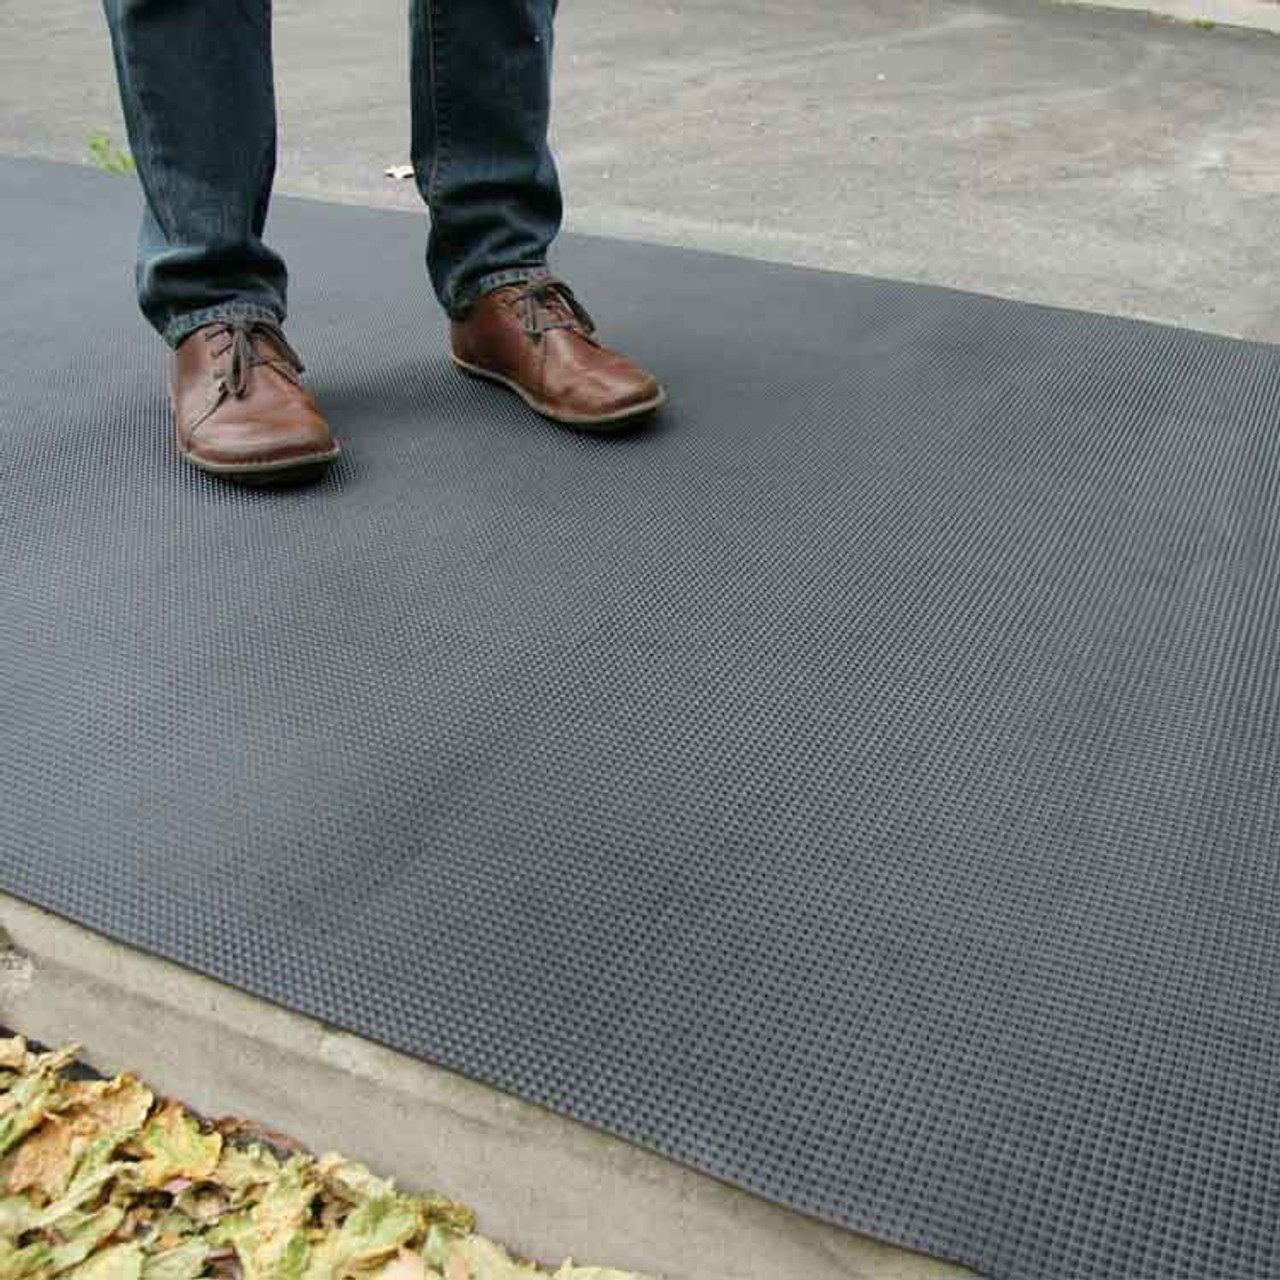 Rubber-Cal Fine-rib Corrugated Rubber Floor Mats - 1/8 in x 4 ft x 15 ft Black Rubber Runners